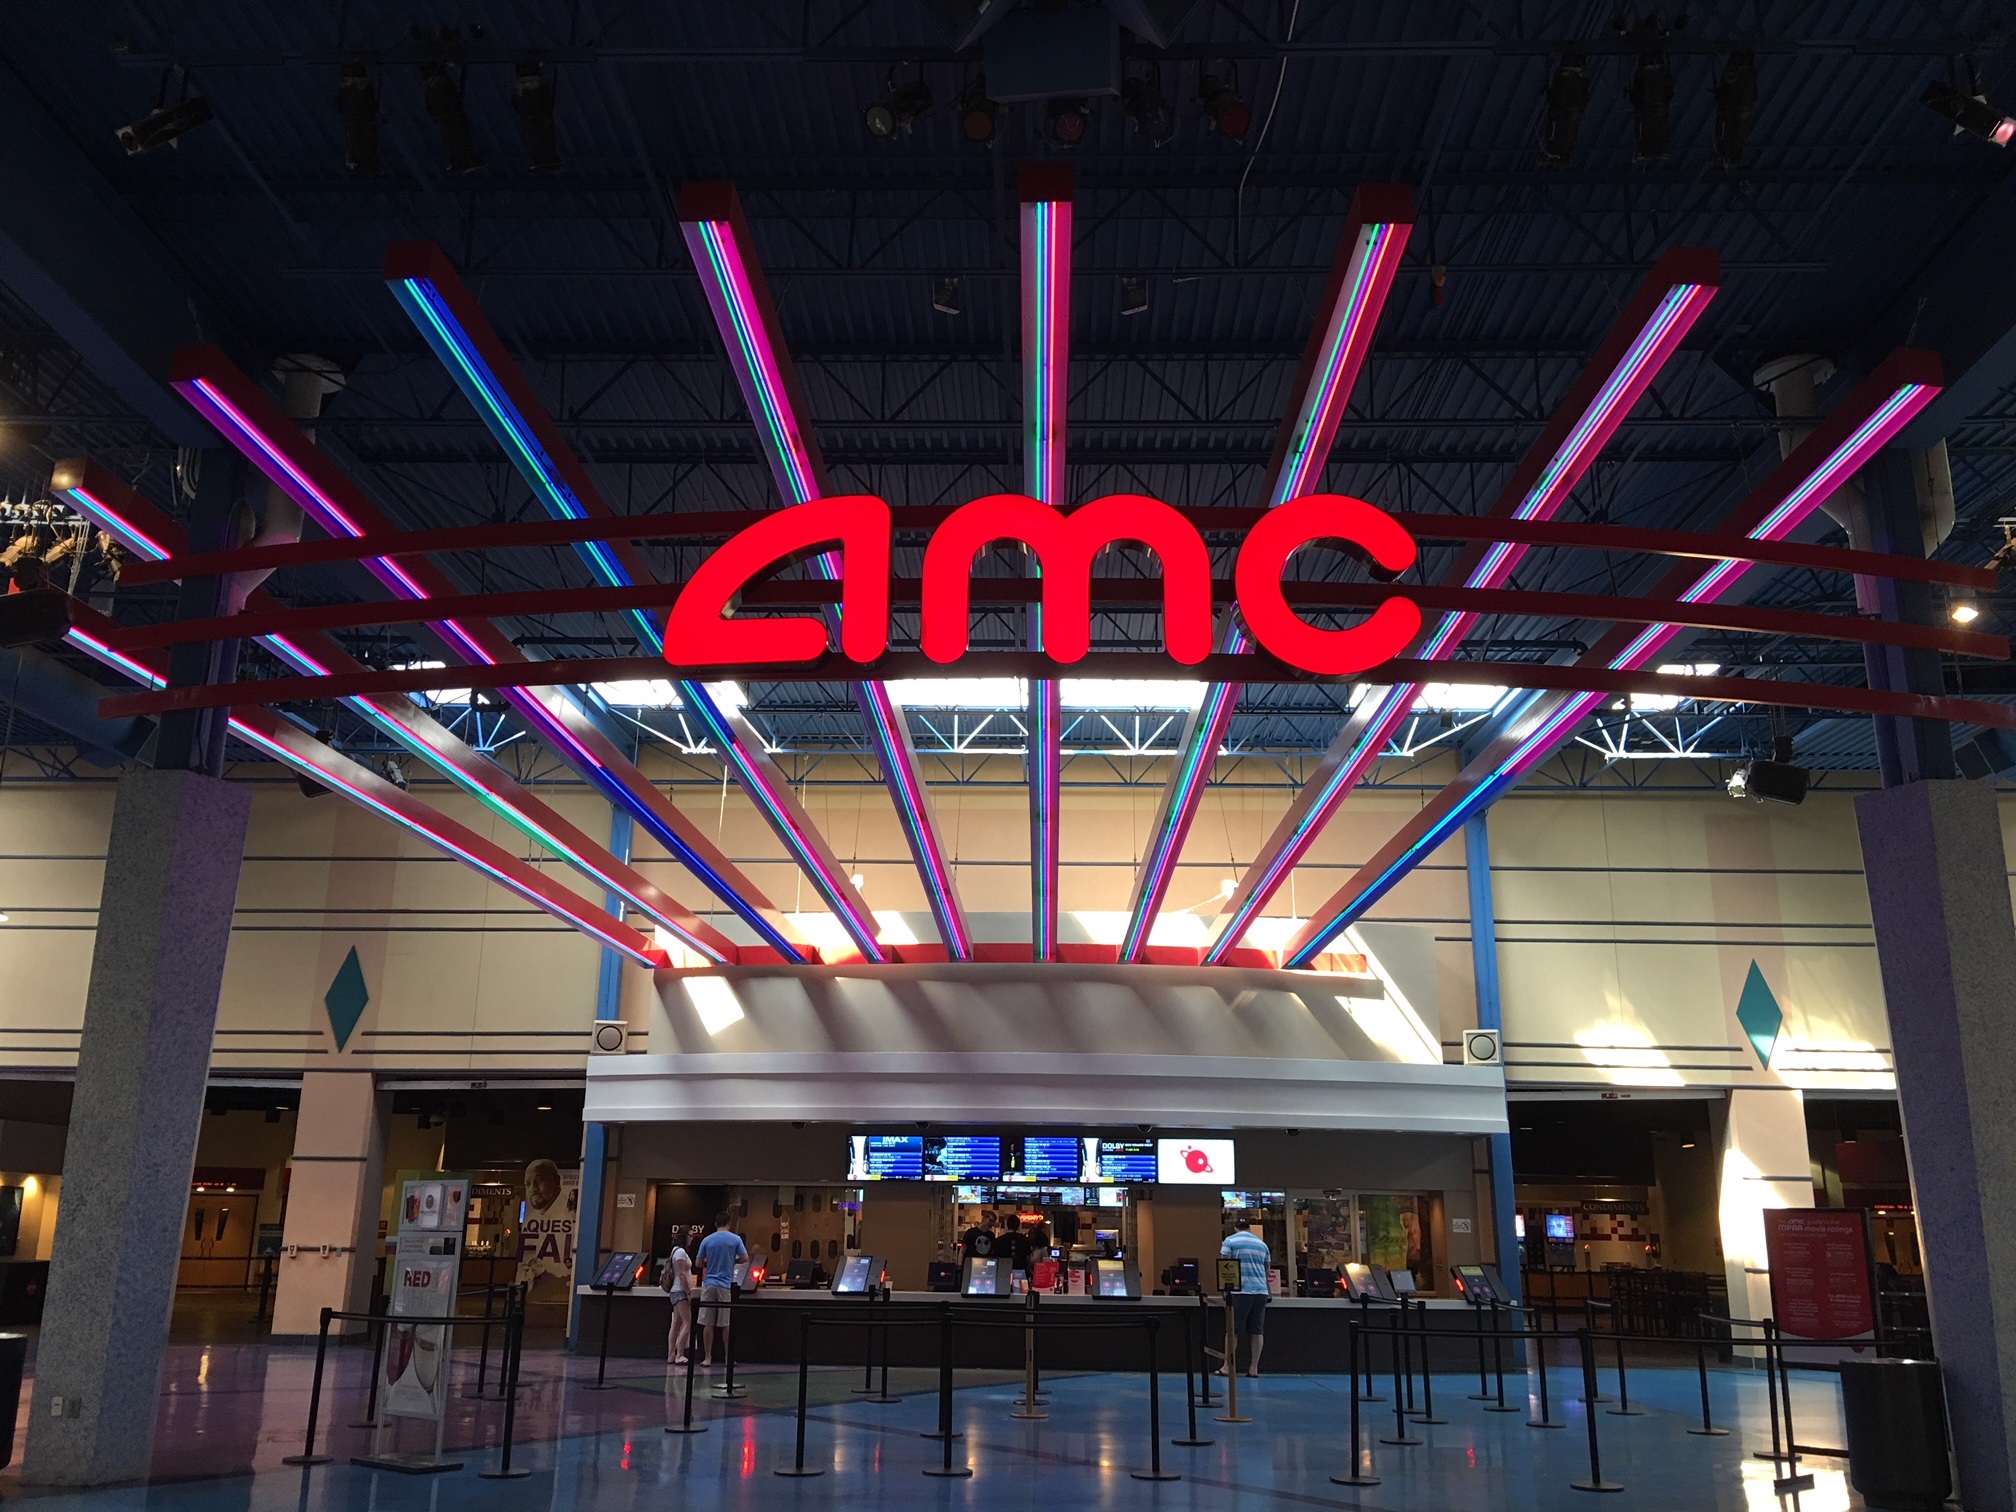 Have you been to our new AMC Theater!? 😍